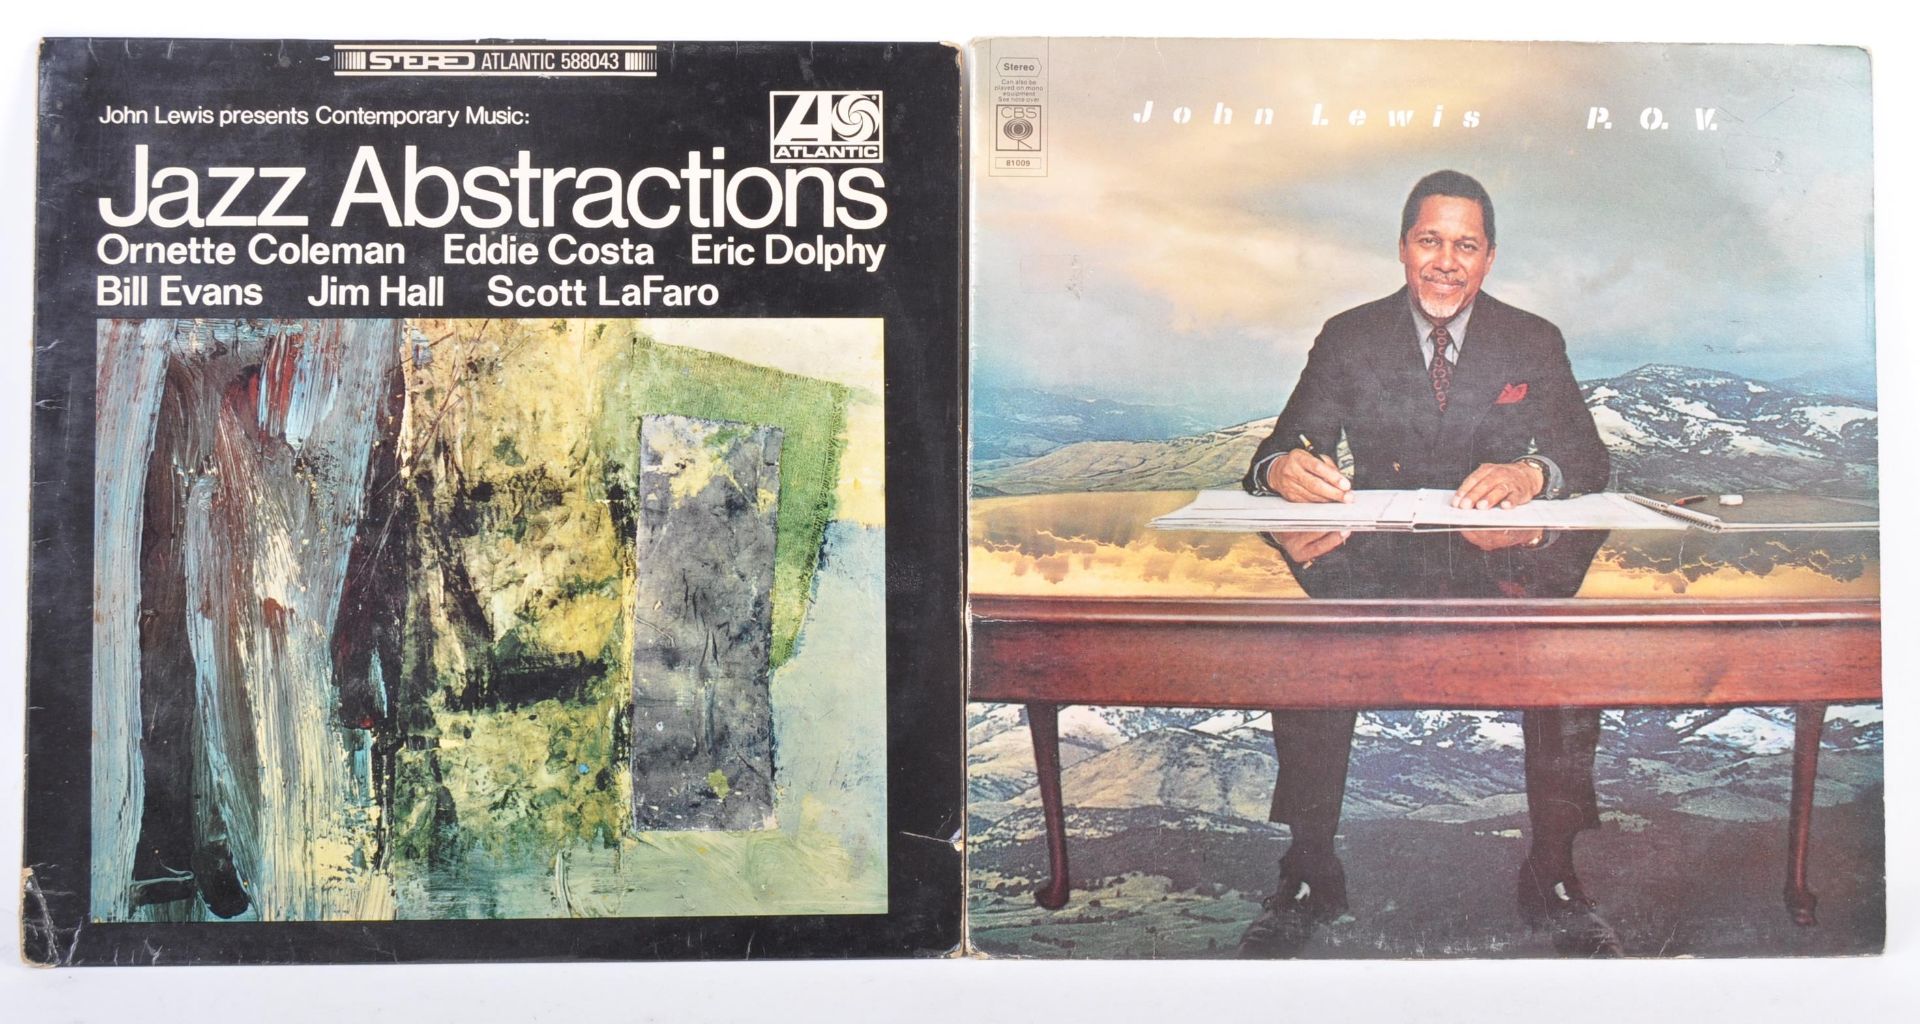 JOHN LEWIS - TWO VINYL RECORDS JAZZ ABSTRACTIONS AND P.O.V